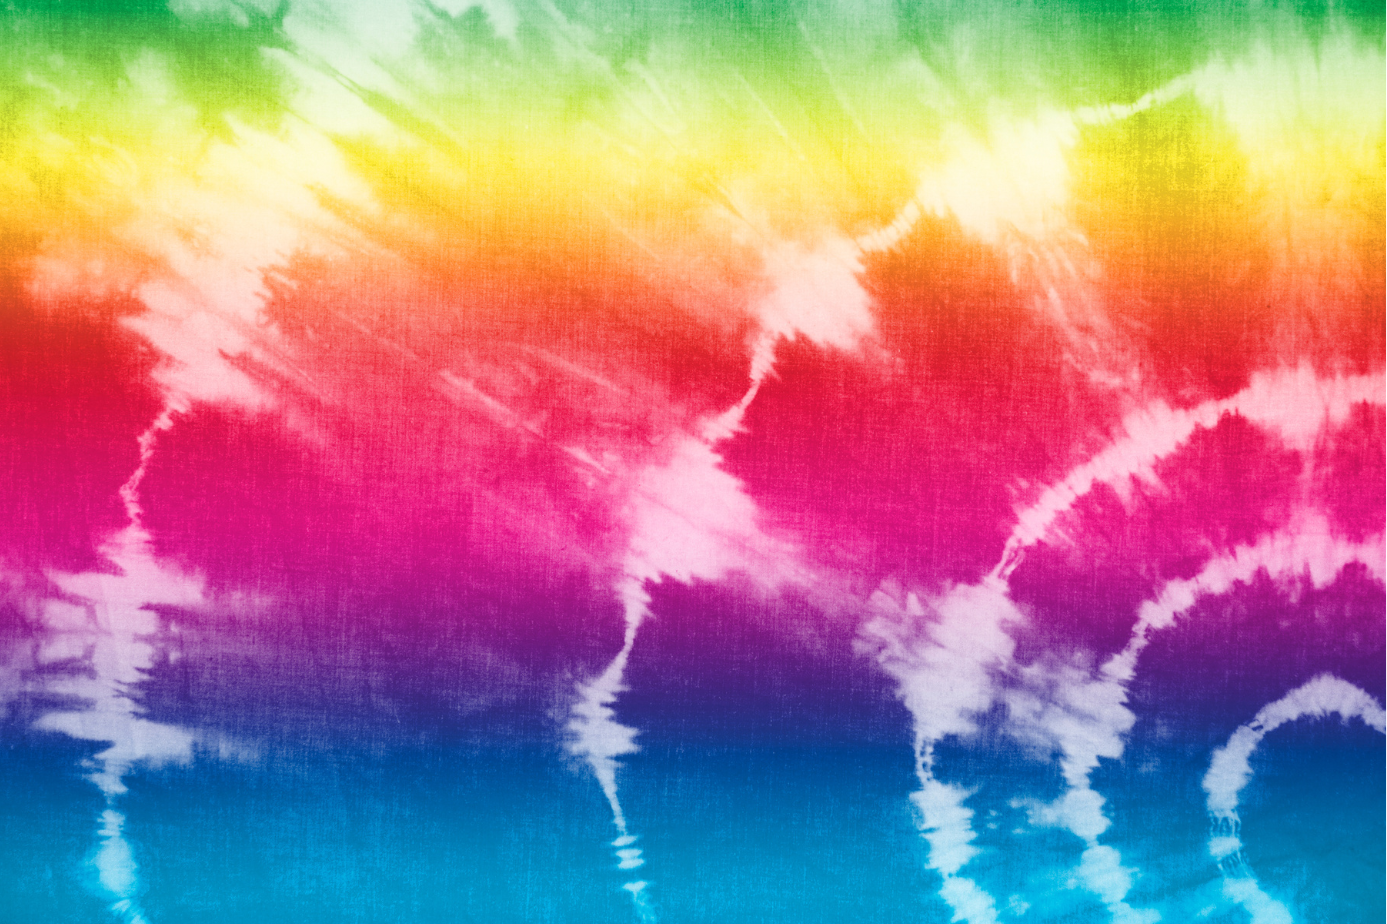 Image of a rainbow-colored tie dye cloth